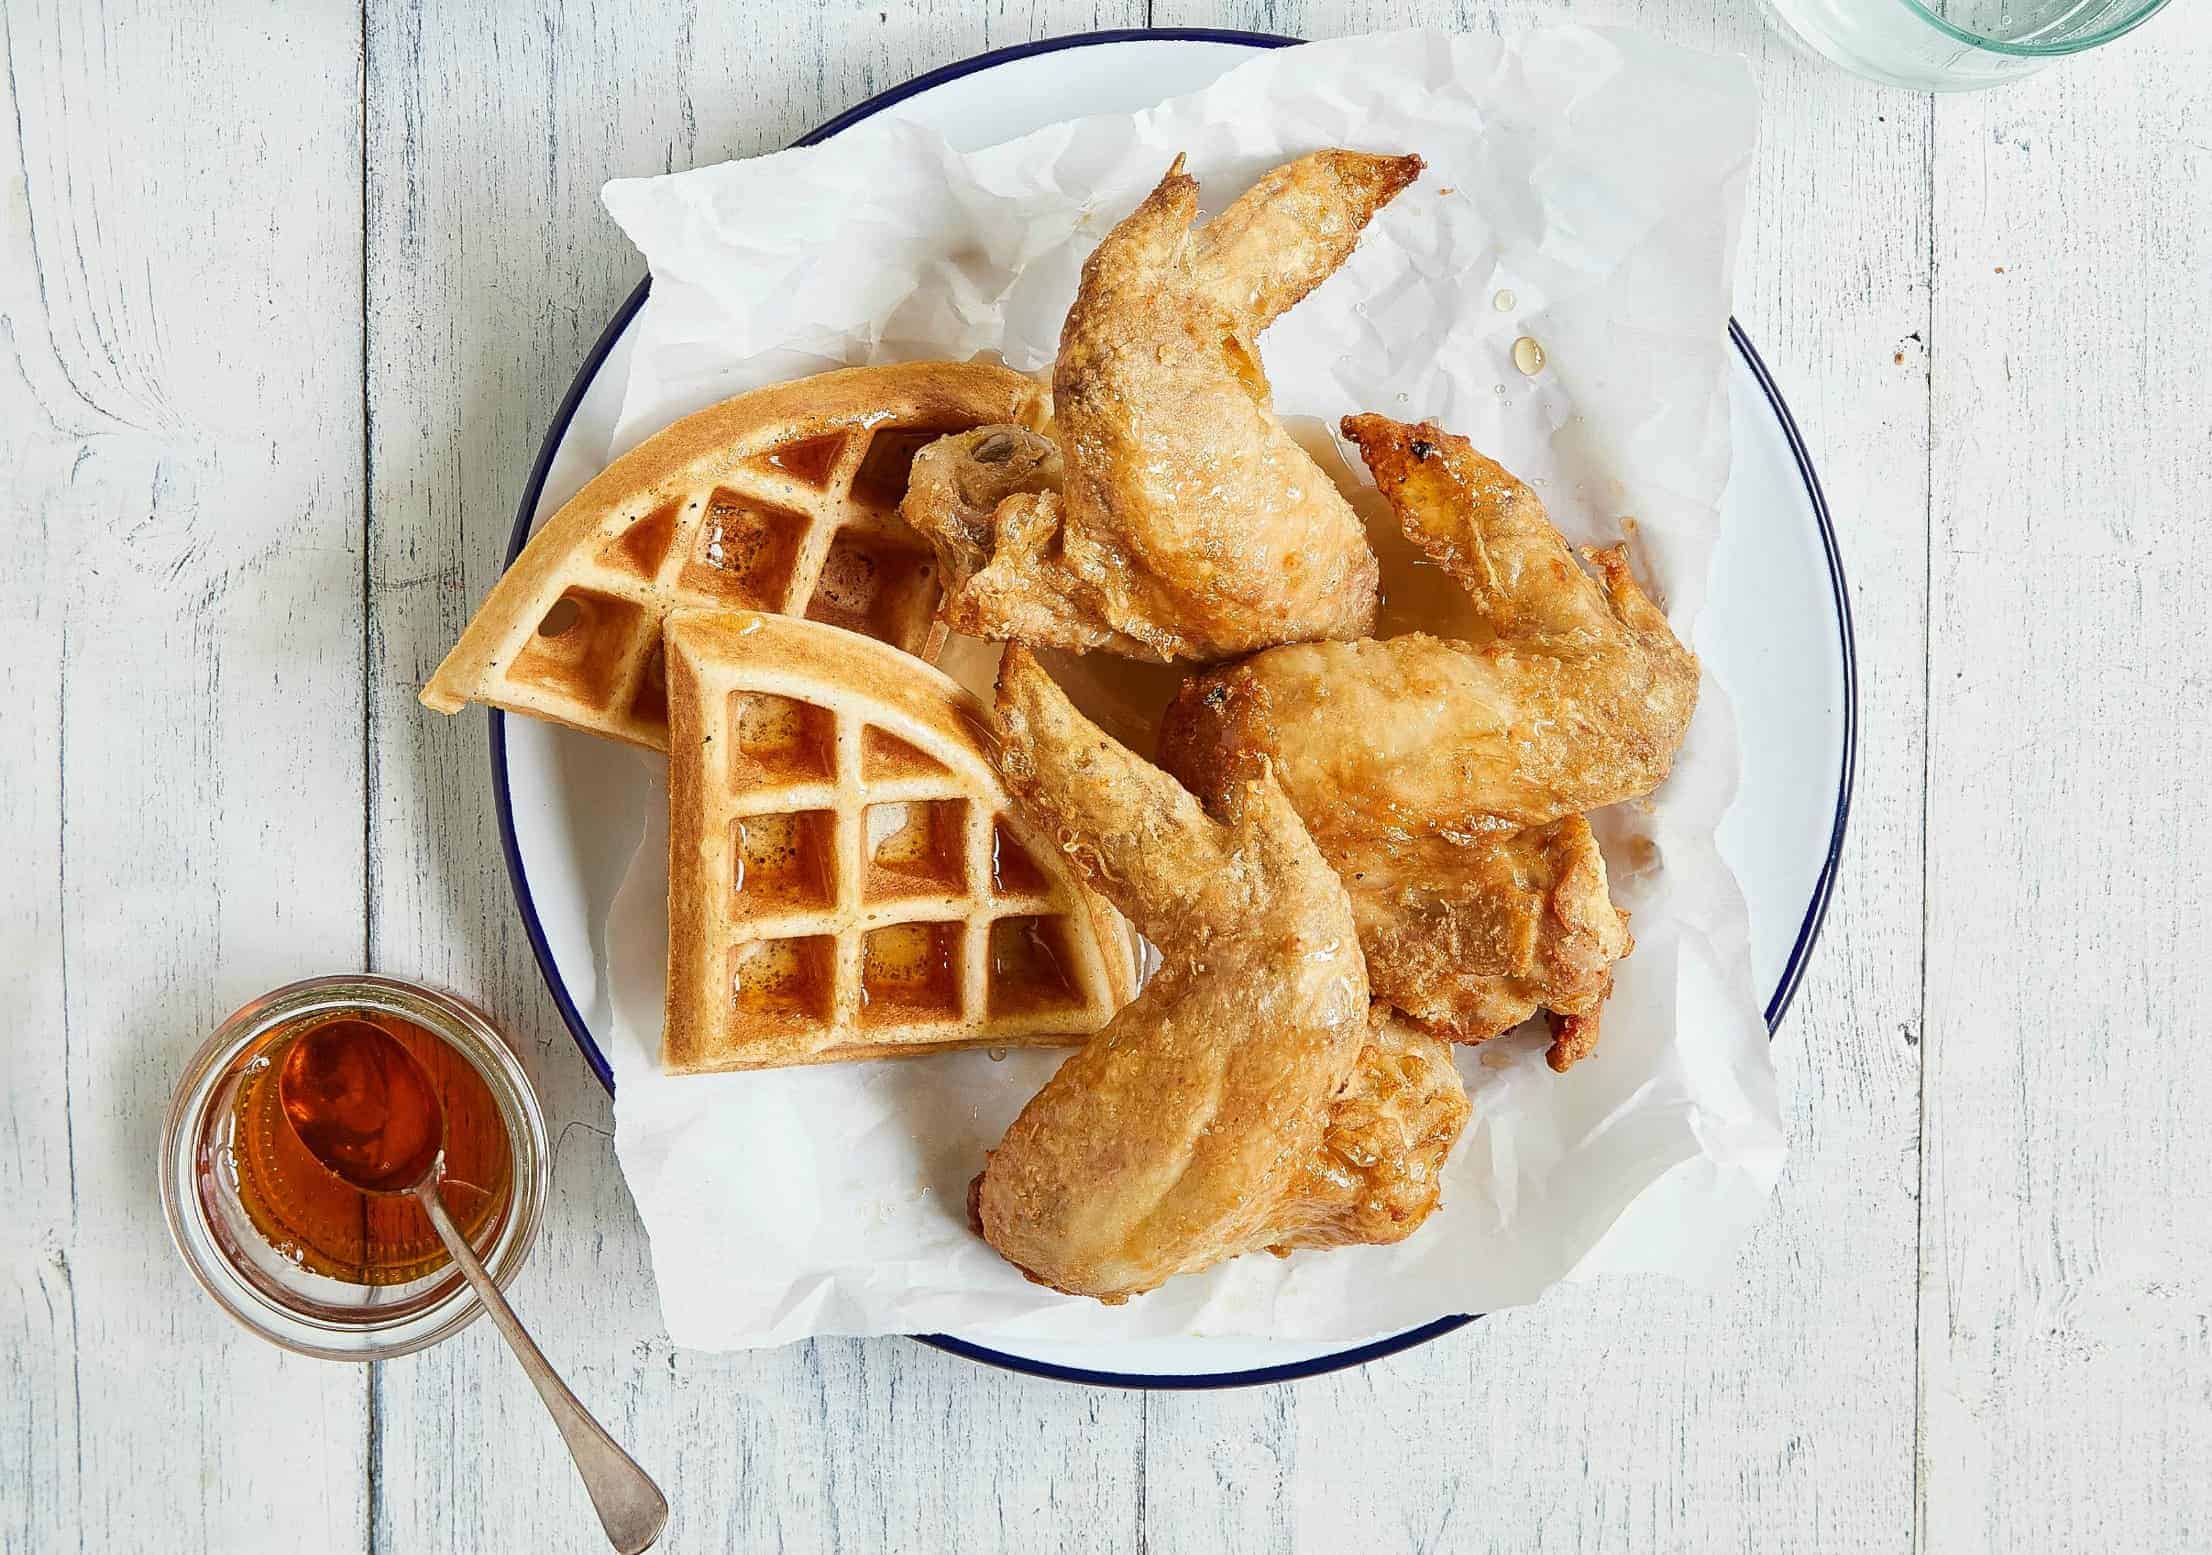 https://www.staysnatched.com/wp-content/uploads/2018/10/Chicken_and_Waffles-copy.jpg